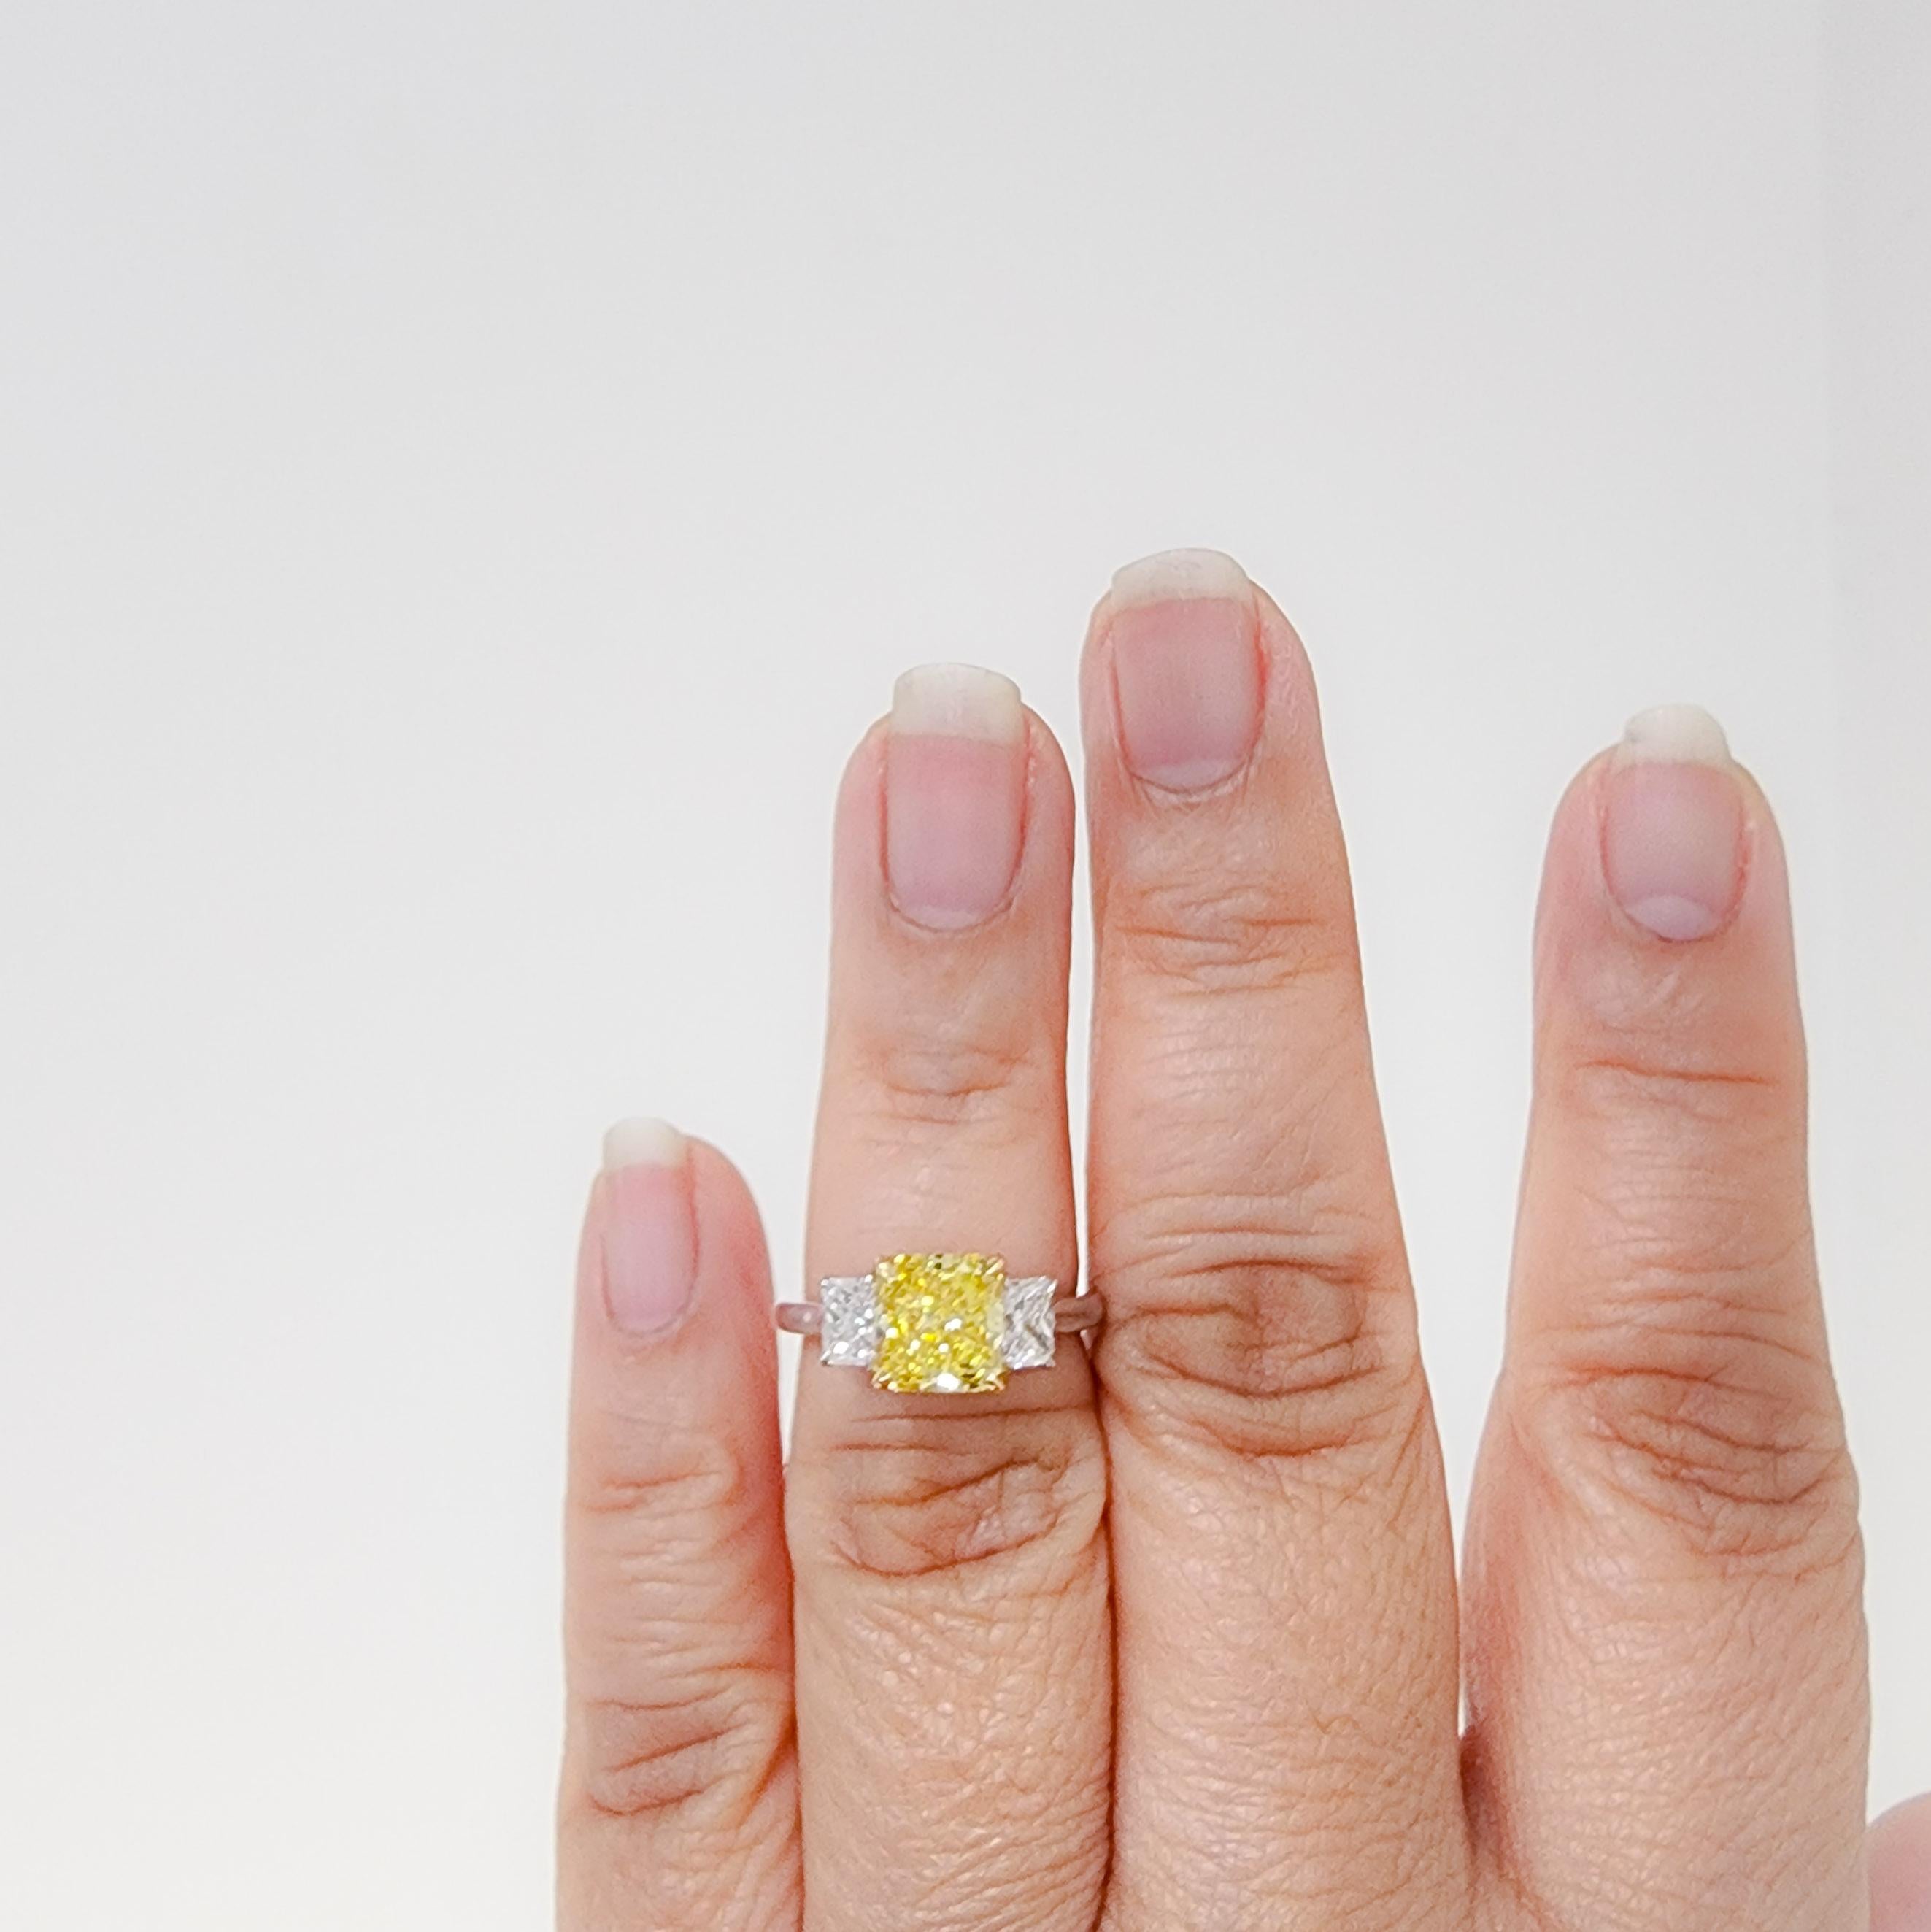 Gorgeous 2.19 ct. fancy vivid yellow diamond radiant, clarity I1 with two good quality white diamond radiants on the sides.  Handmade in 18k yellow gold and platinum.  Ring size 6.5.  GIA certificate included.